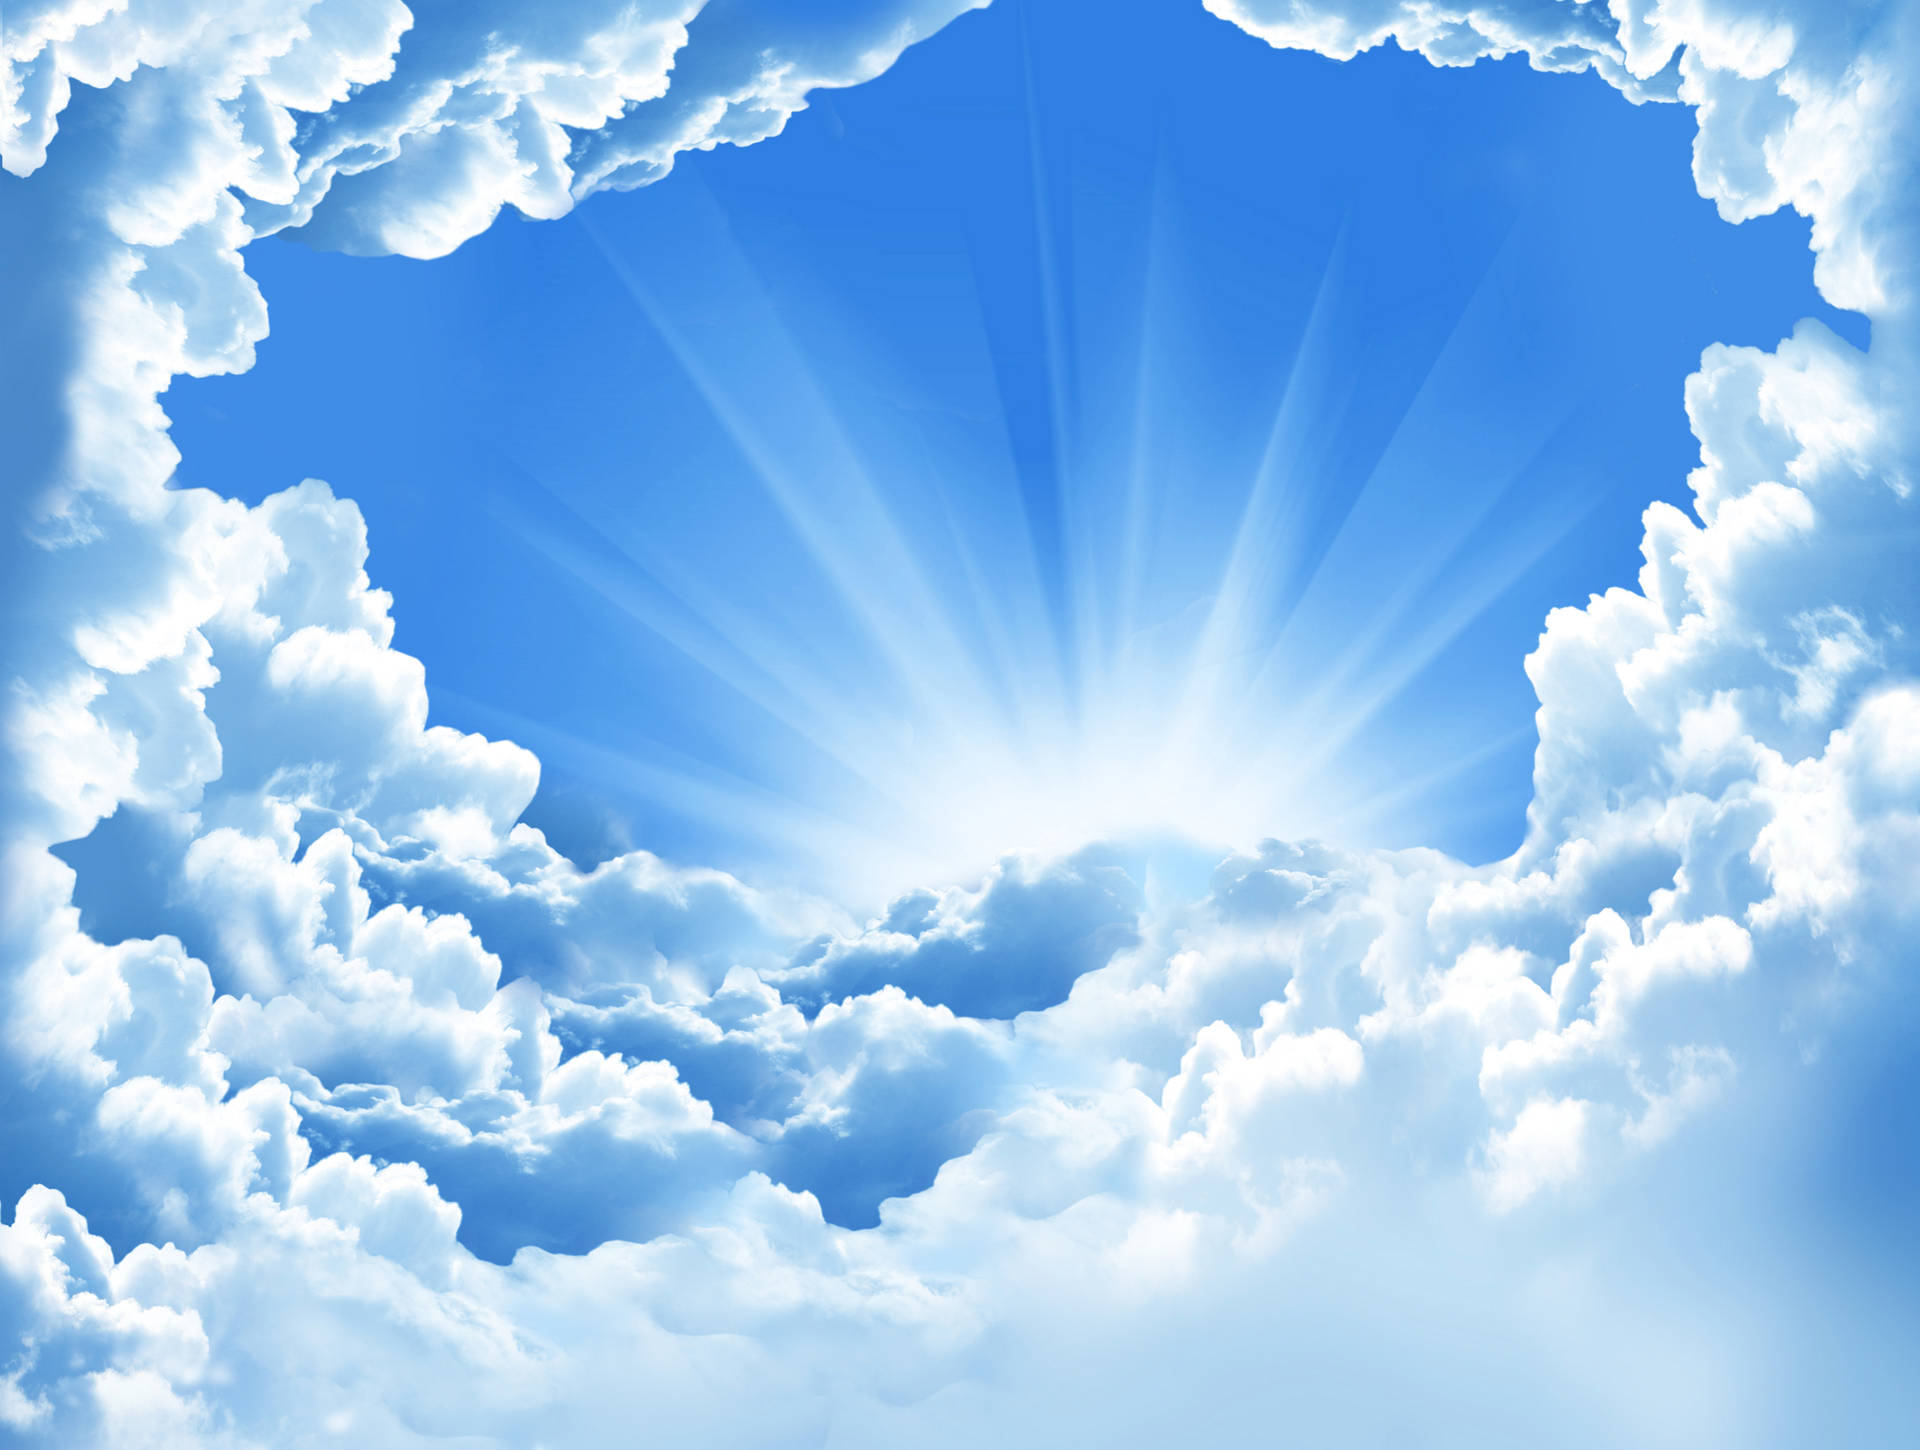 Free Sky Wallpaper Downloads 1200 Sky Wallpapers for FREE  Wallpapers com